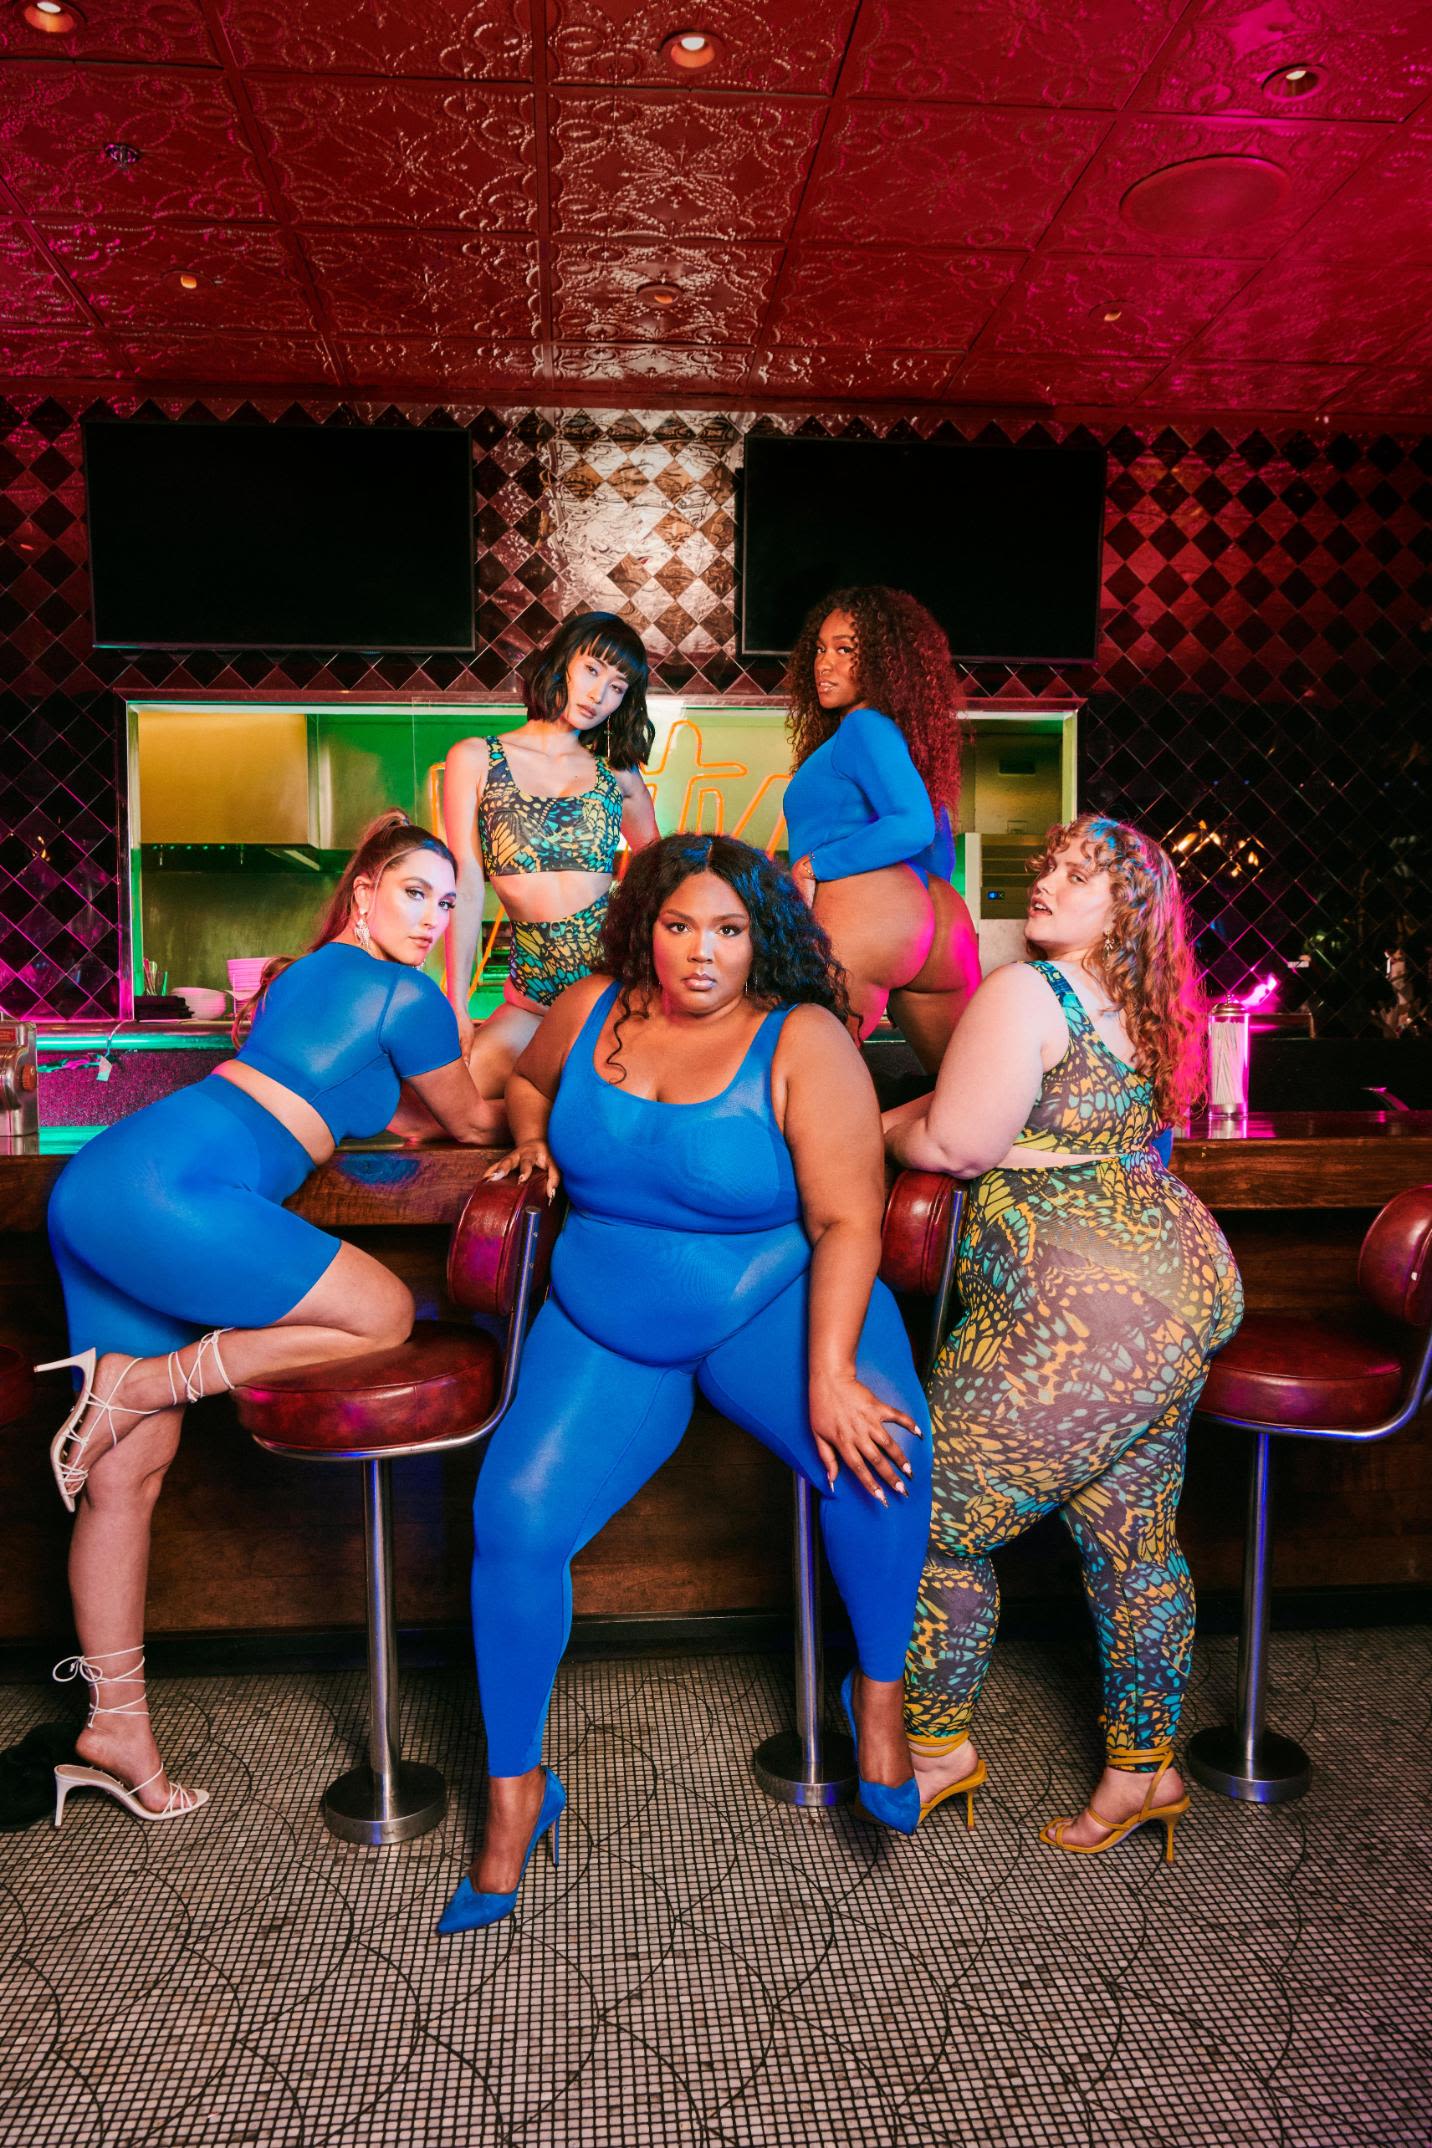 Maybe we should all stop pretending Lizzo's new shapewear brand is